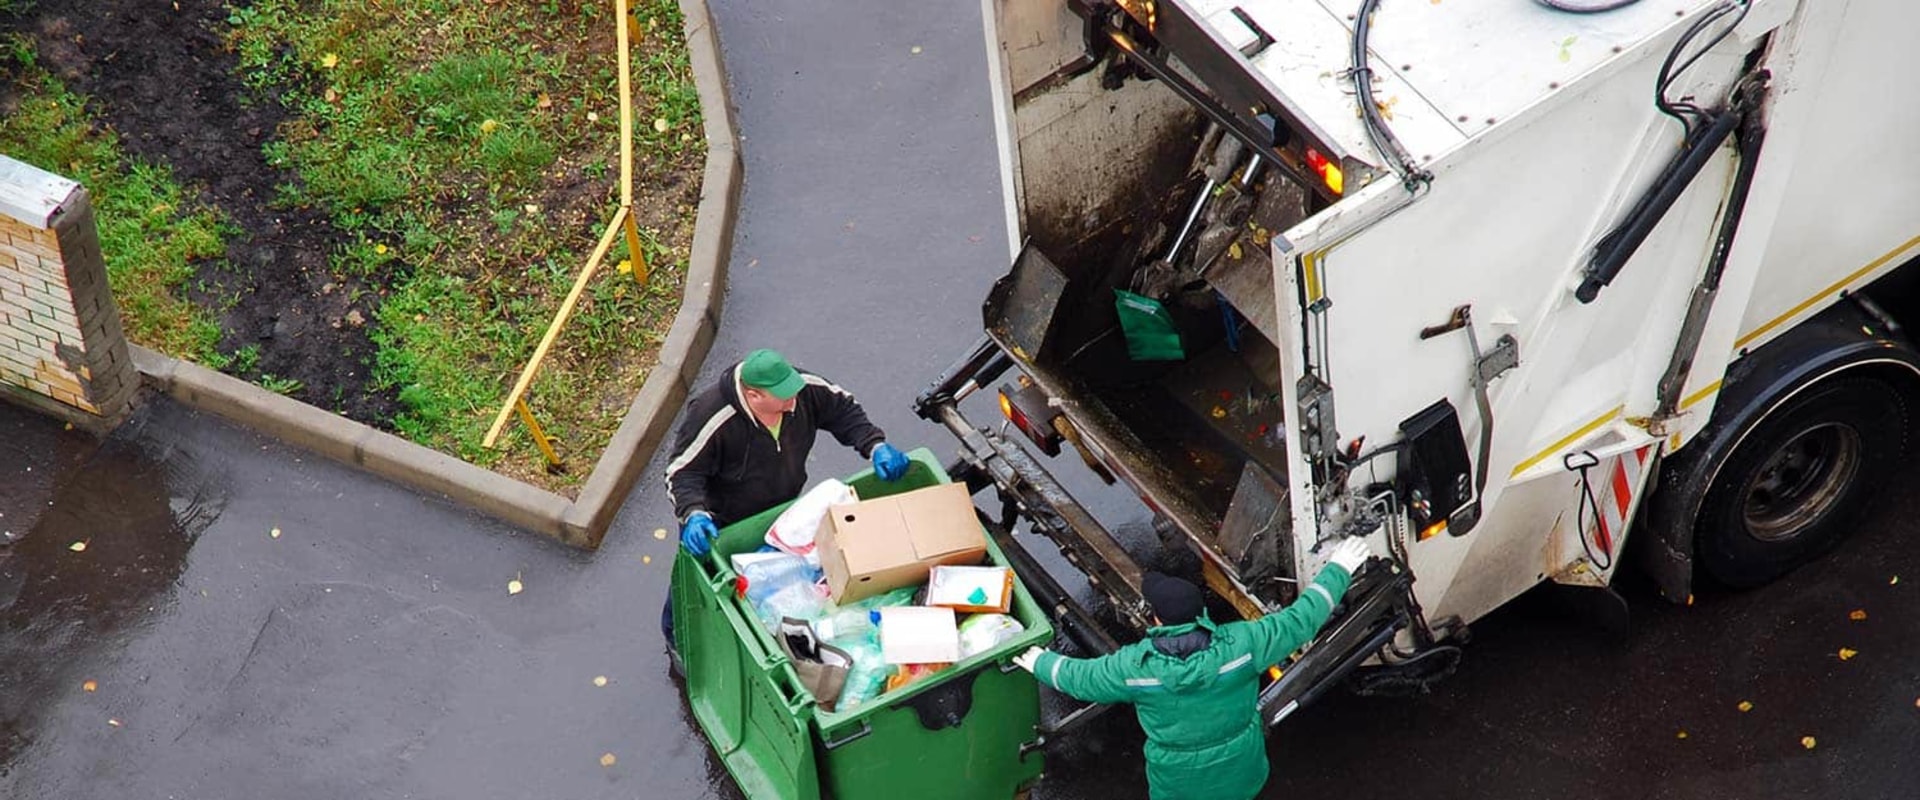 Can You Hire the Same Junk Removal Company Multiple Times?